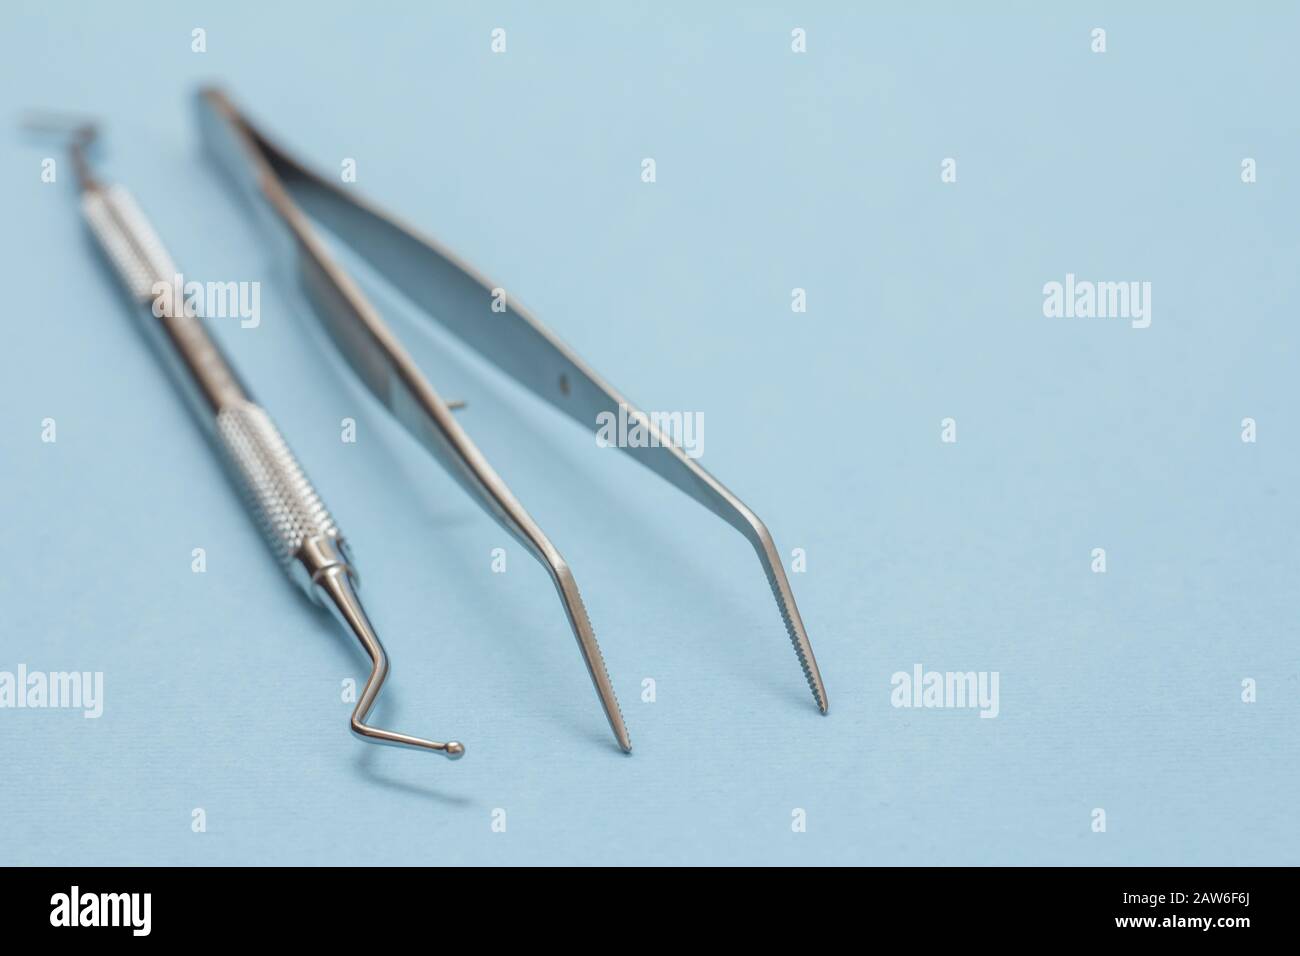 Set of metal dental instruments for dental treatment. Dental plugger and tweezers on blue background. Medical tools. Shallow depth of field. Stock Photo